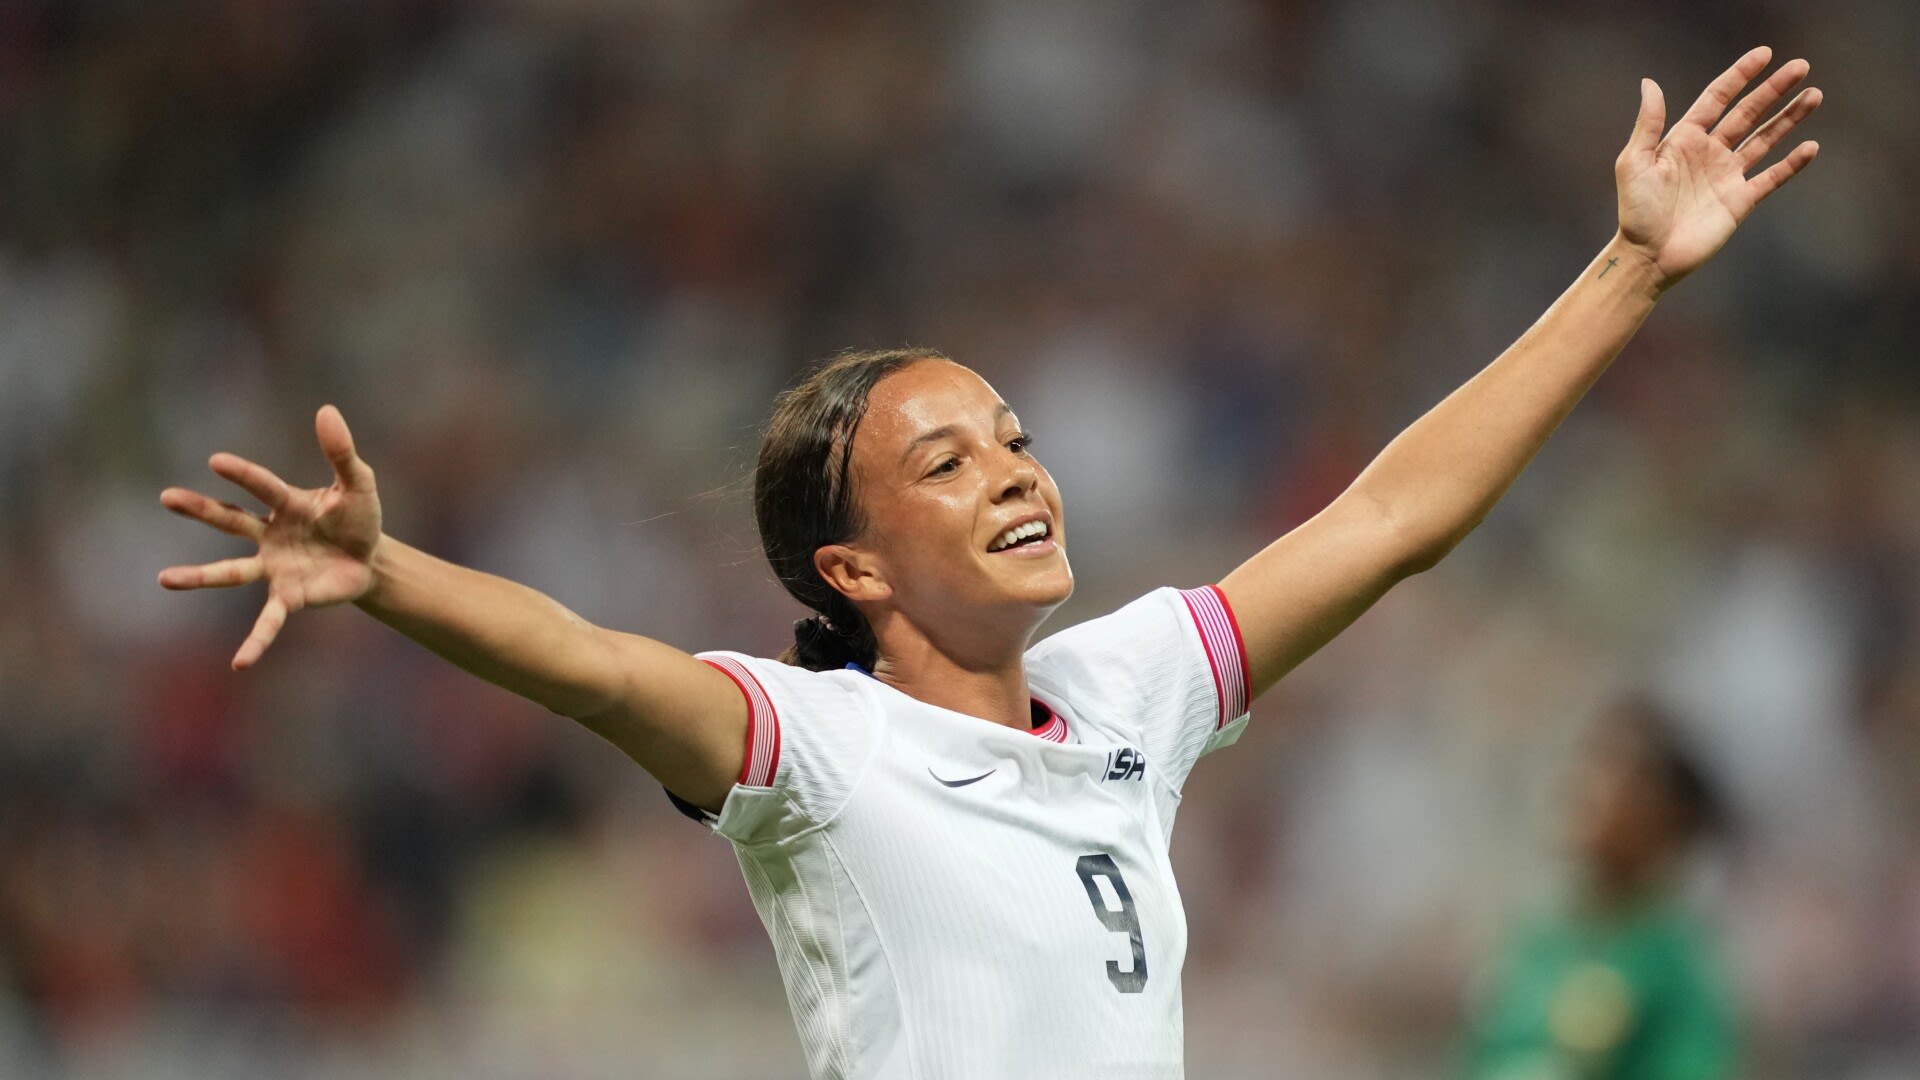 USA women's soccer vs Japan: How to watch, stream link, team news, prediction for Olympic quarterfinal